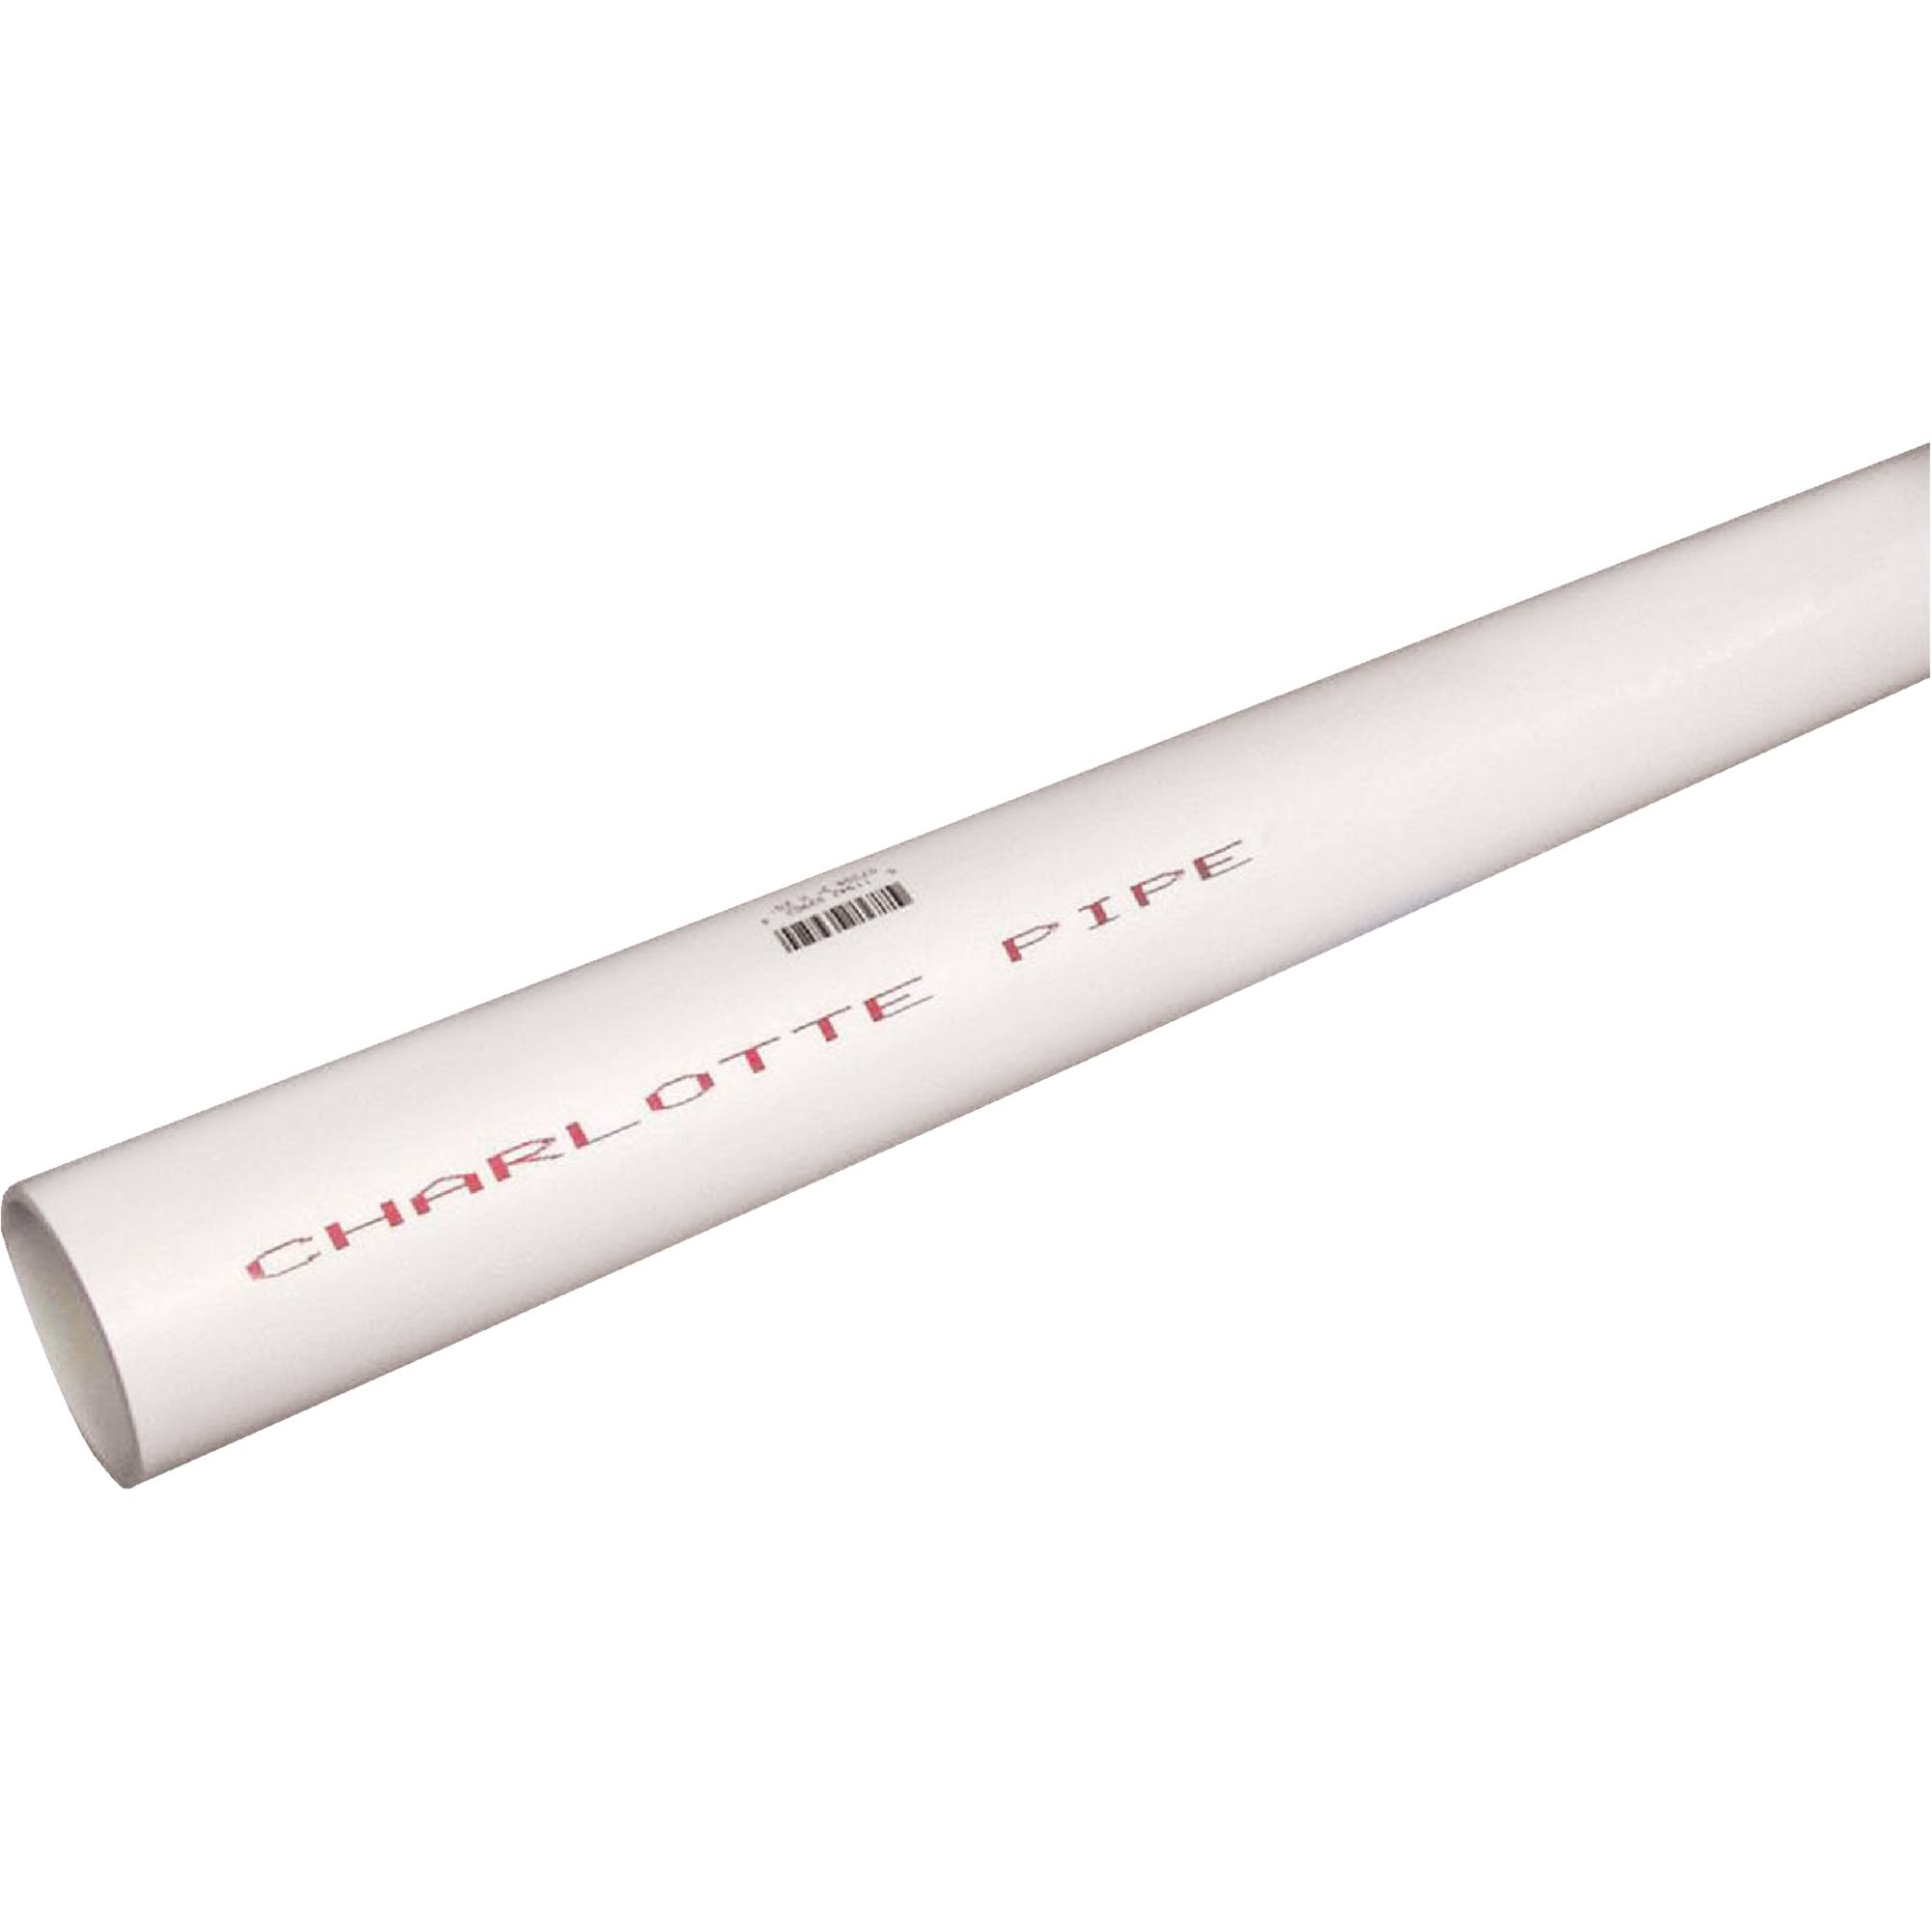 Charlotte Pipe 1-1/2"x20' Schedule 40 PVC Bell End Pipe